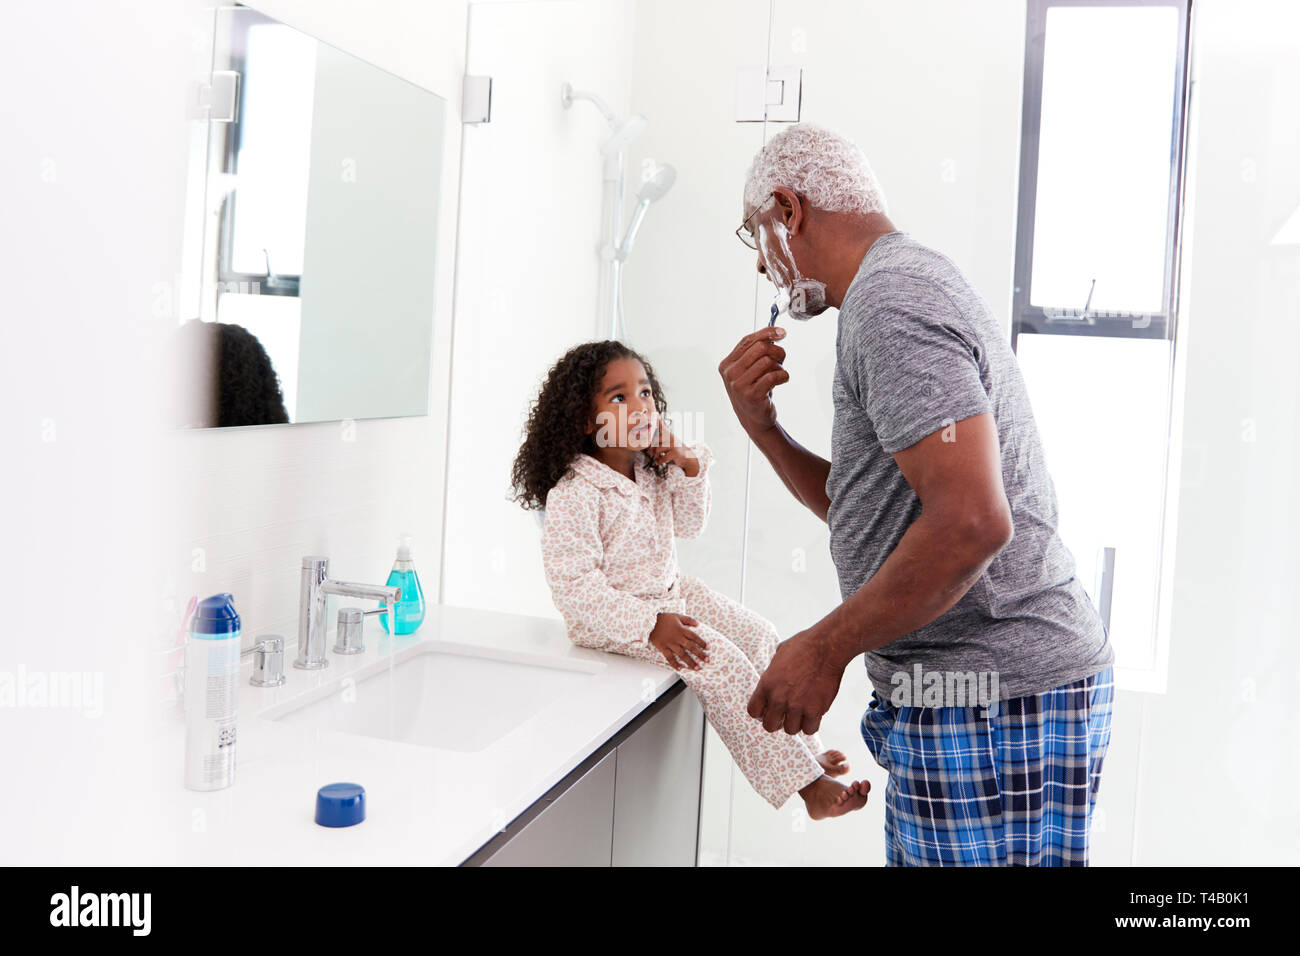 Grandfather Wearing Pajamas In Bathroom Shaving Whilst Granddaughter Watches Stock Photo